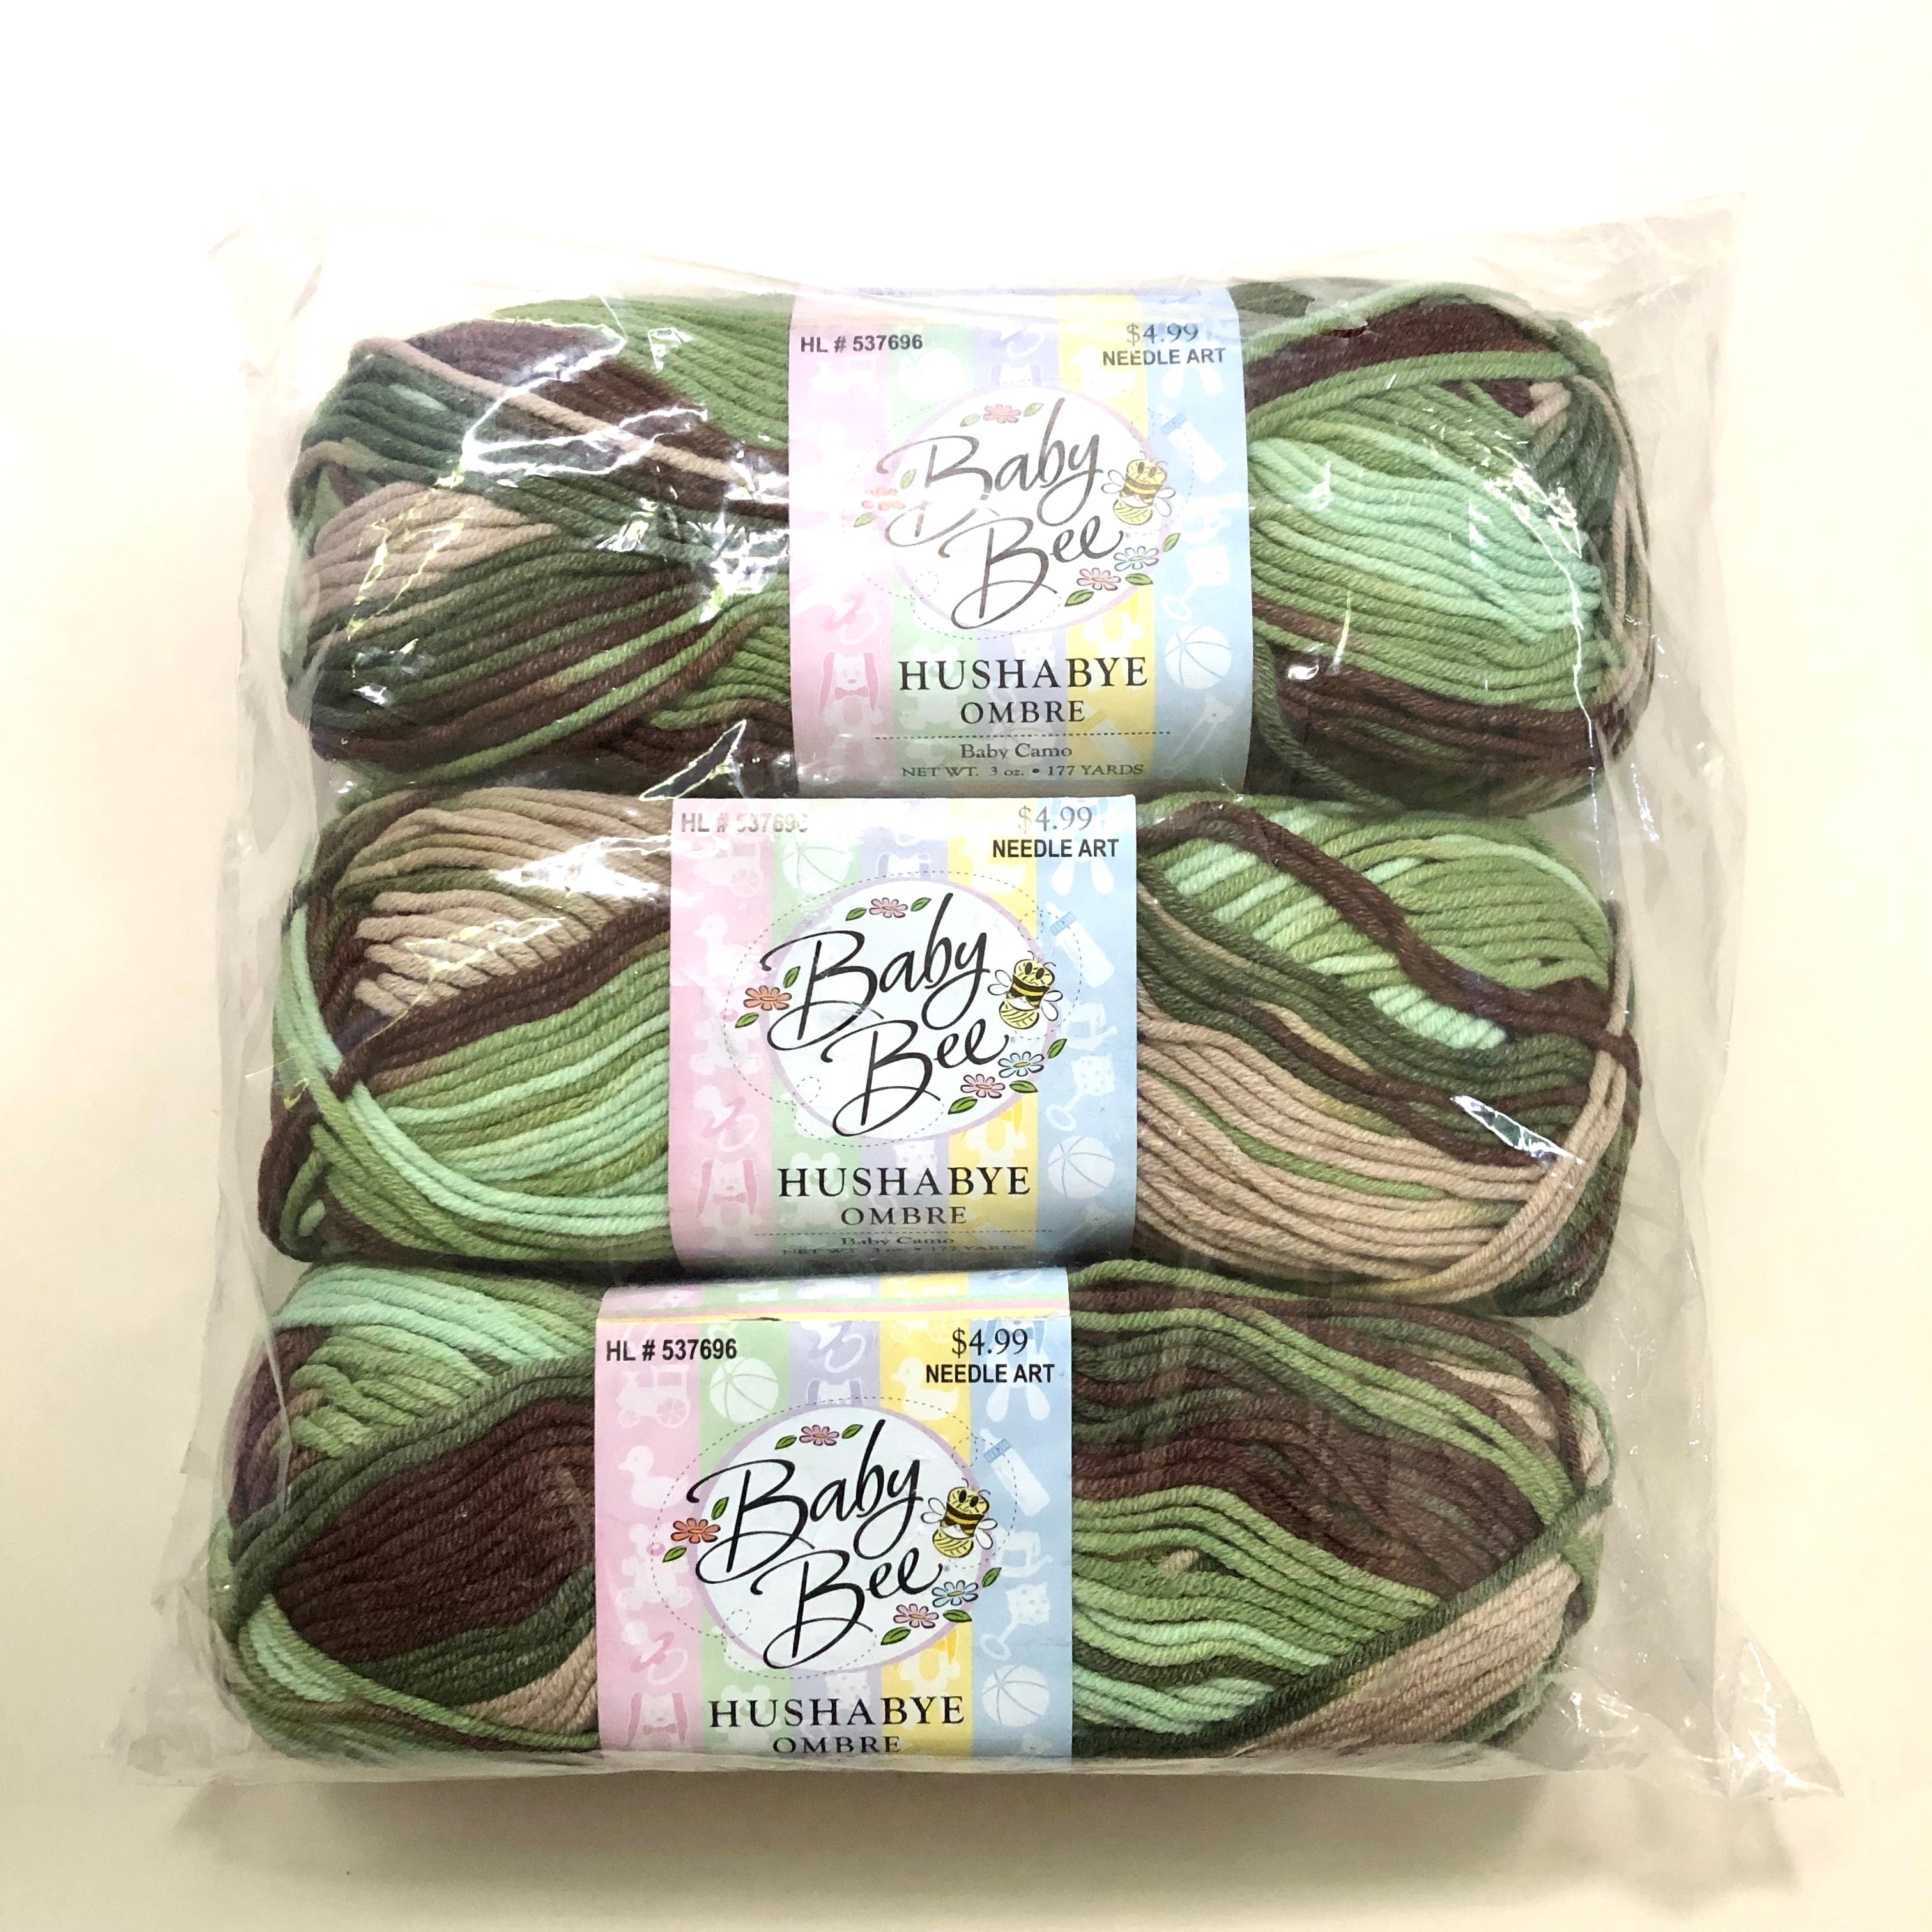 YARN (DISCONTINUED): Lot of 3 skeins (per bag) Hobby Lobby Baby